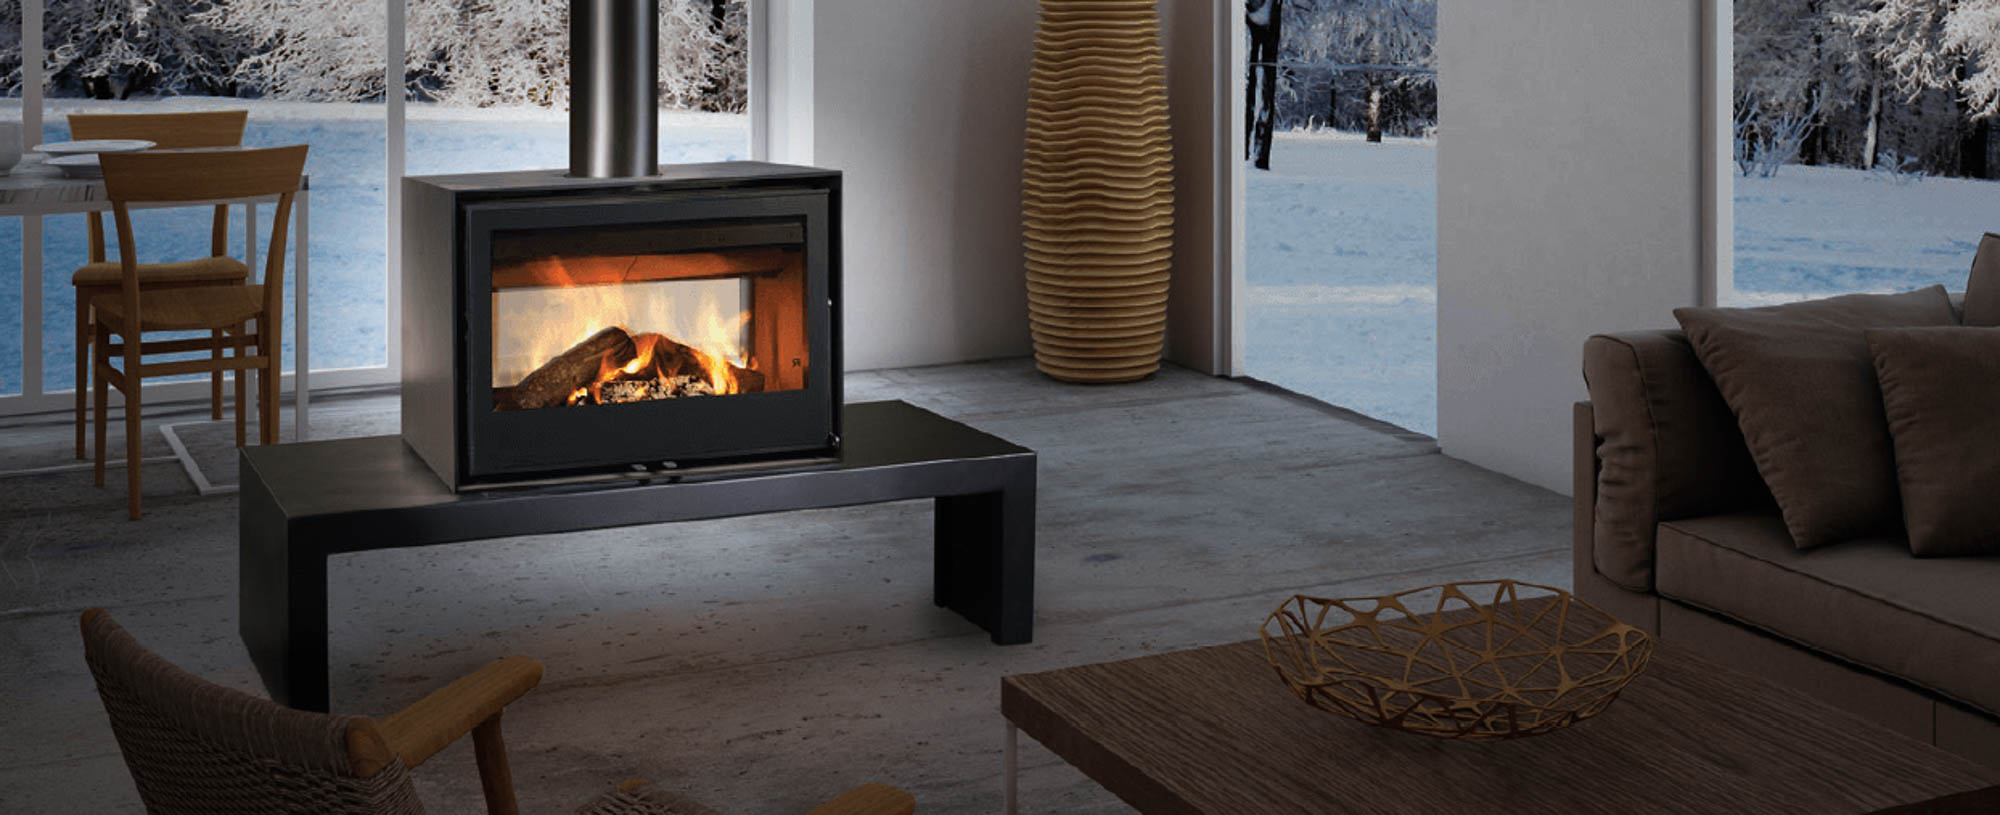 10 Reasons Why Wood Stoves Are Making a Comeback in Modern Homes